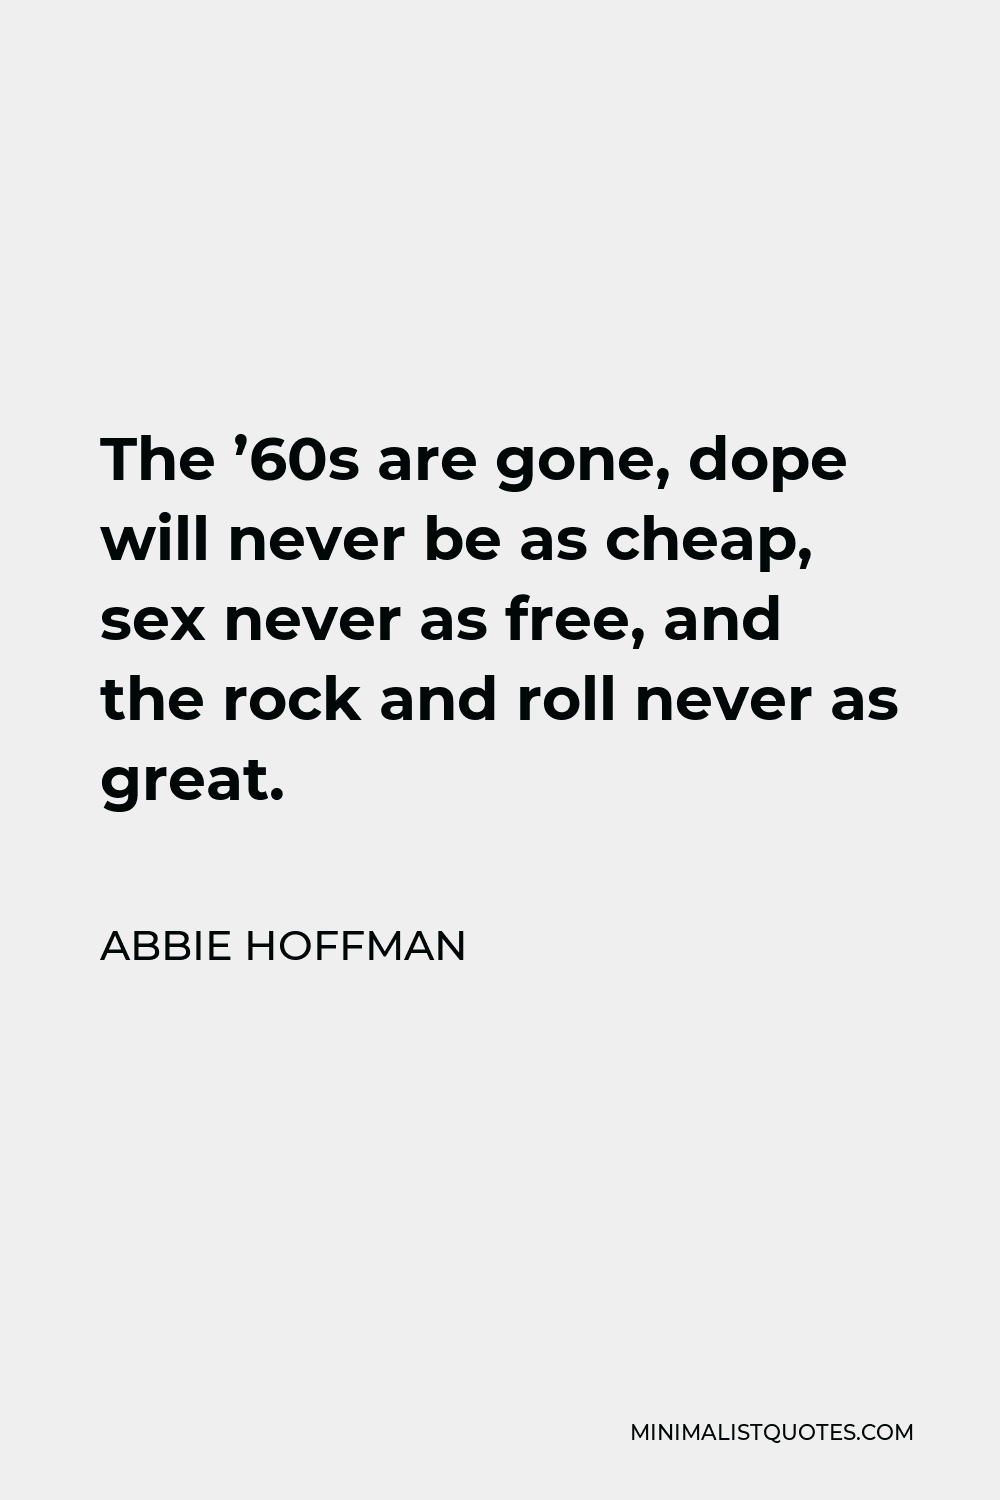 Abbie Hoffman Quote - The ’60s are gone, dope will never be as cheap, sex never as free, and the rock and roll never as great.